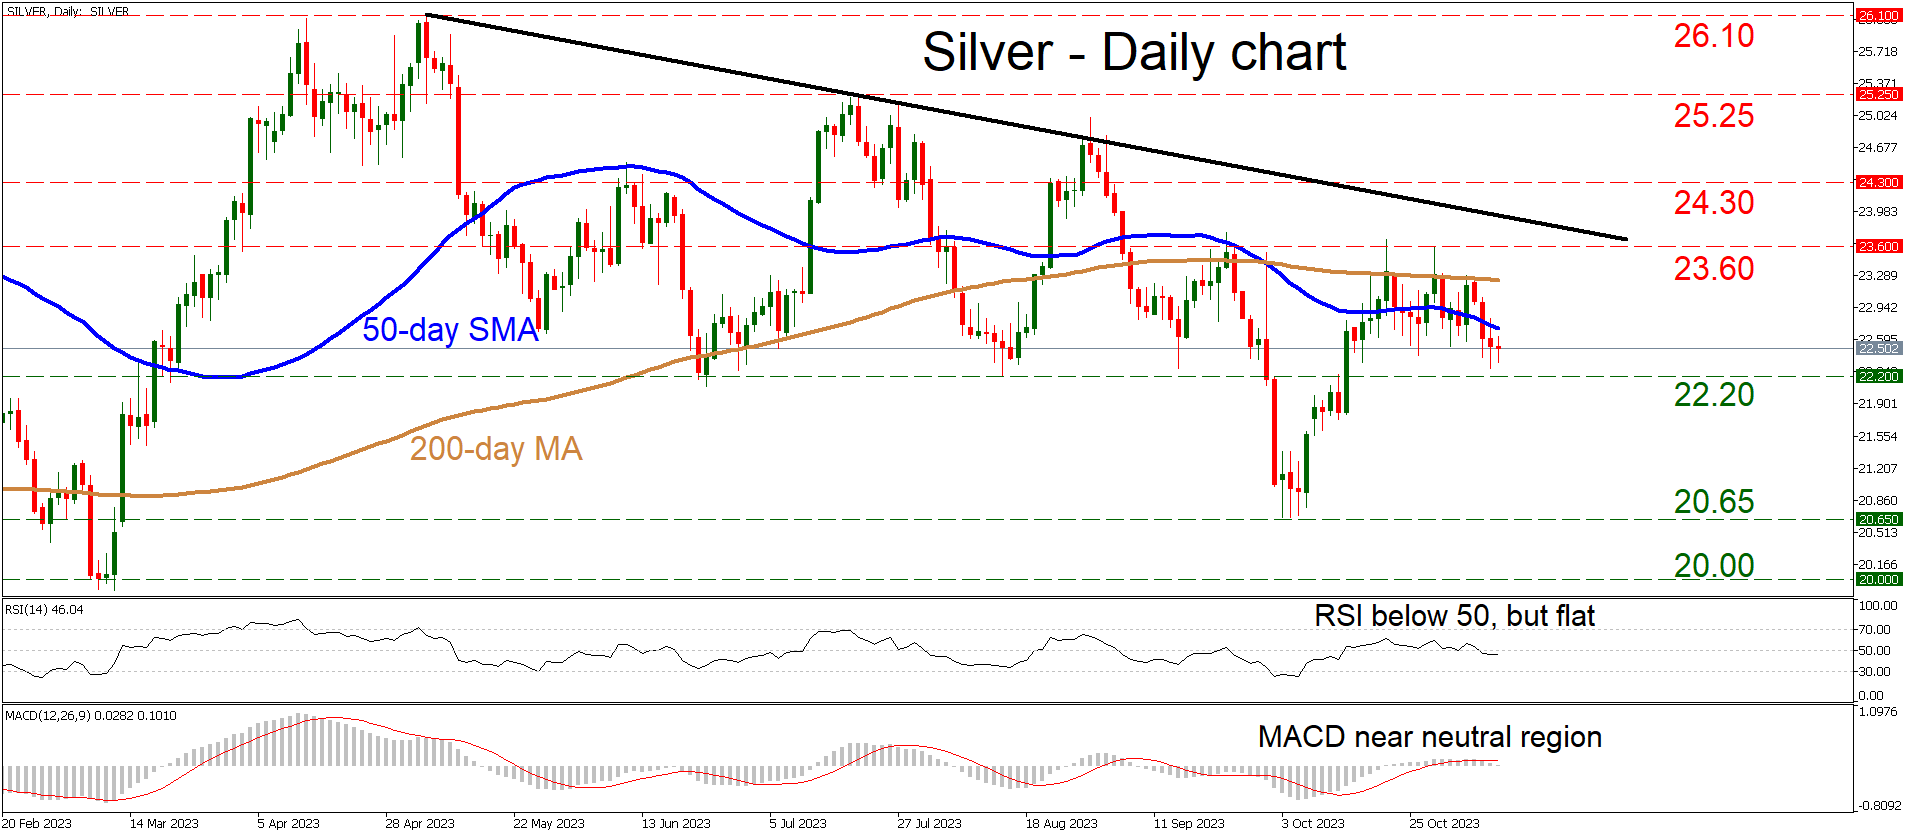 Silver Prices Grapple with Downtrend: Technical Analysis and Potential Inflection Points